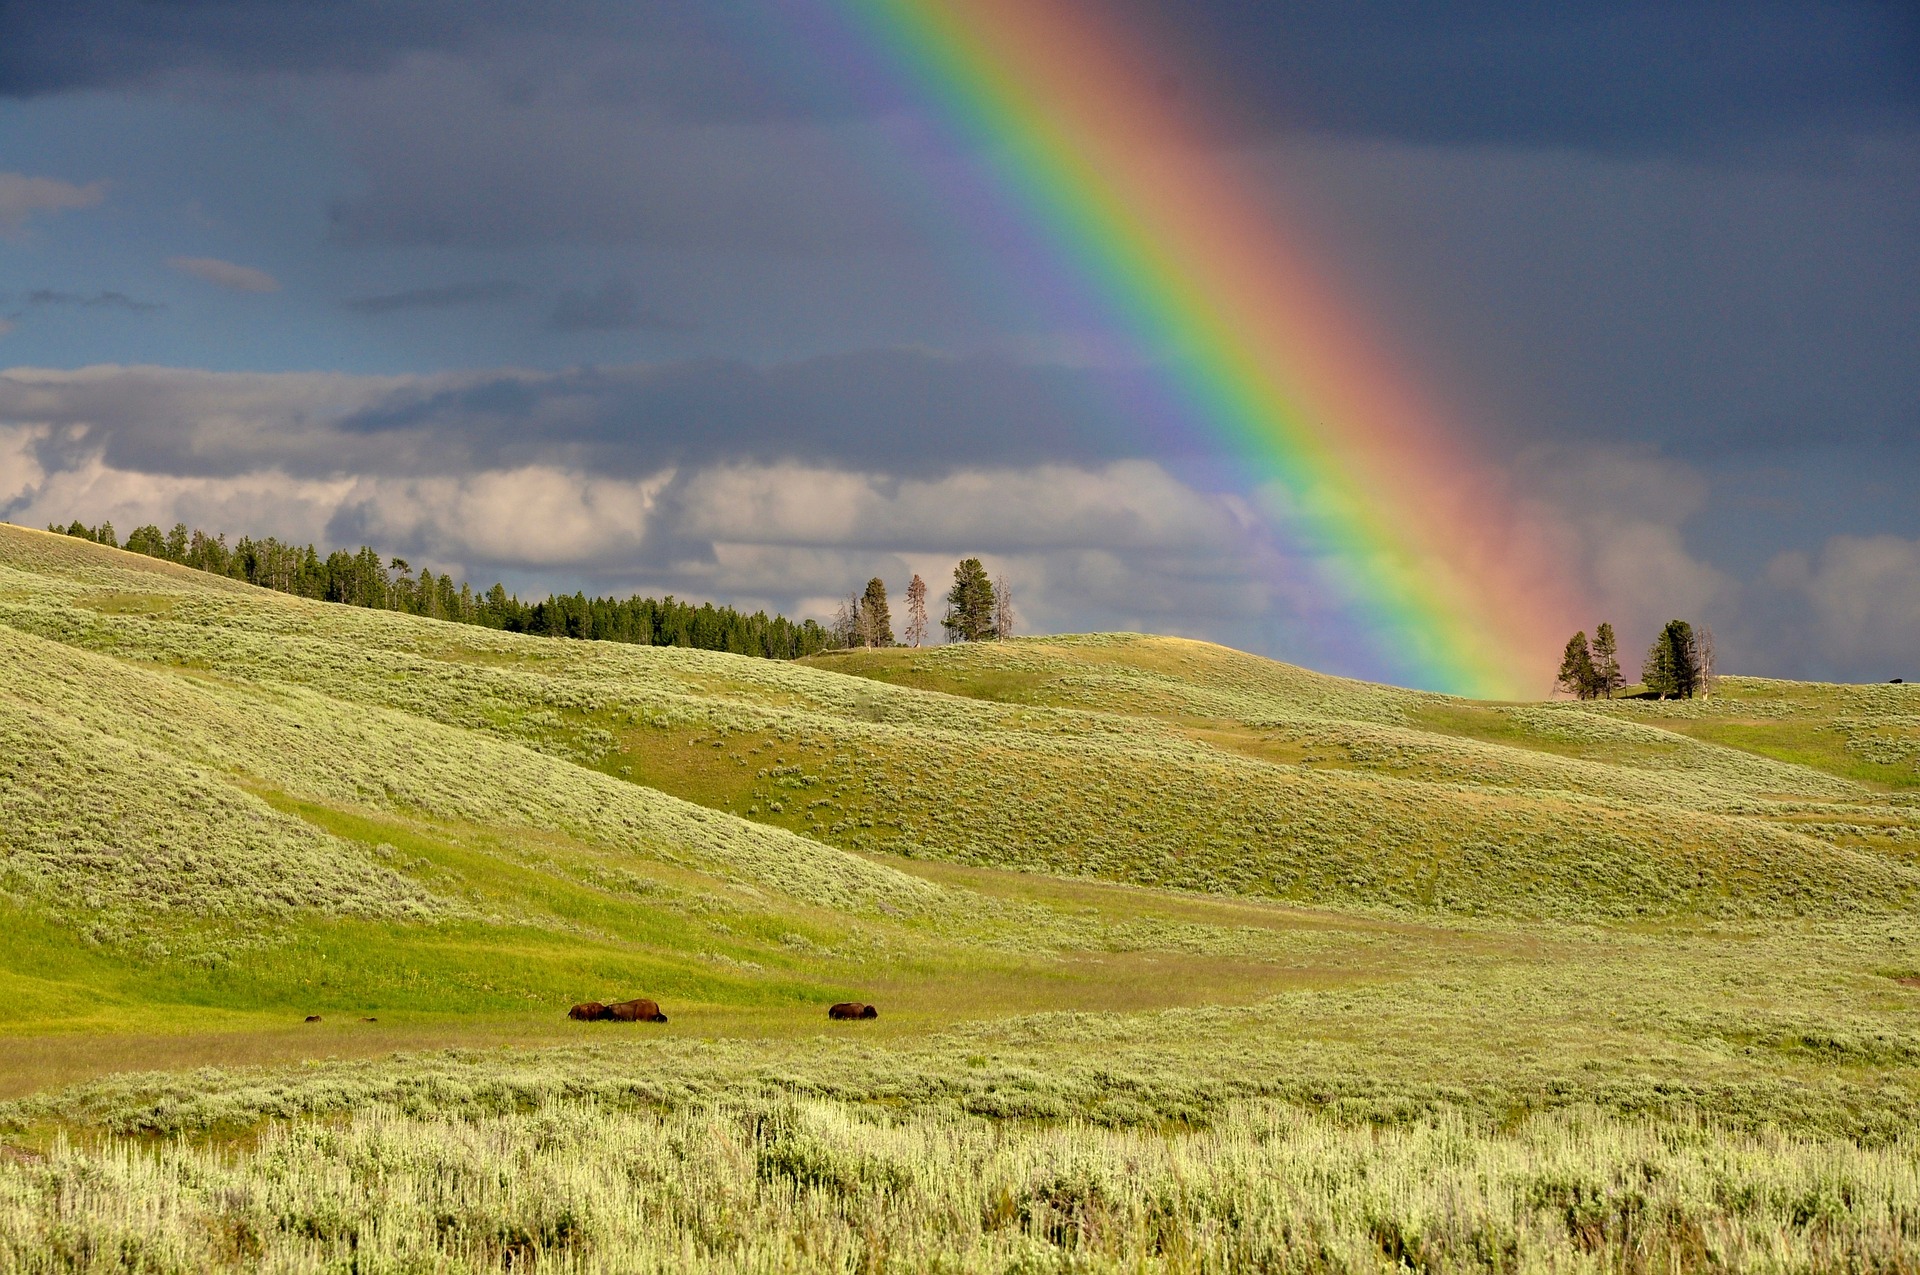 7 Mesmerizing Types of Rainbows That Will Leave You Spellbound with Nature’s Wonders